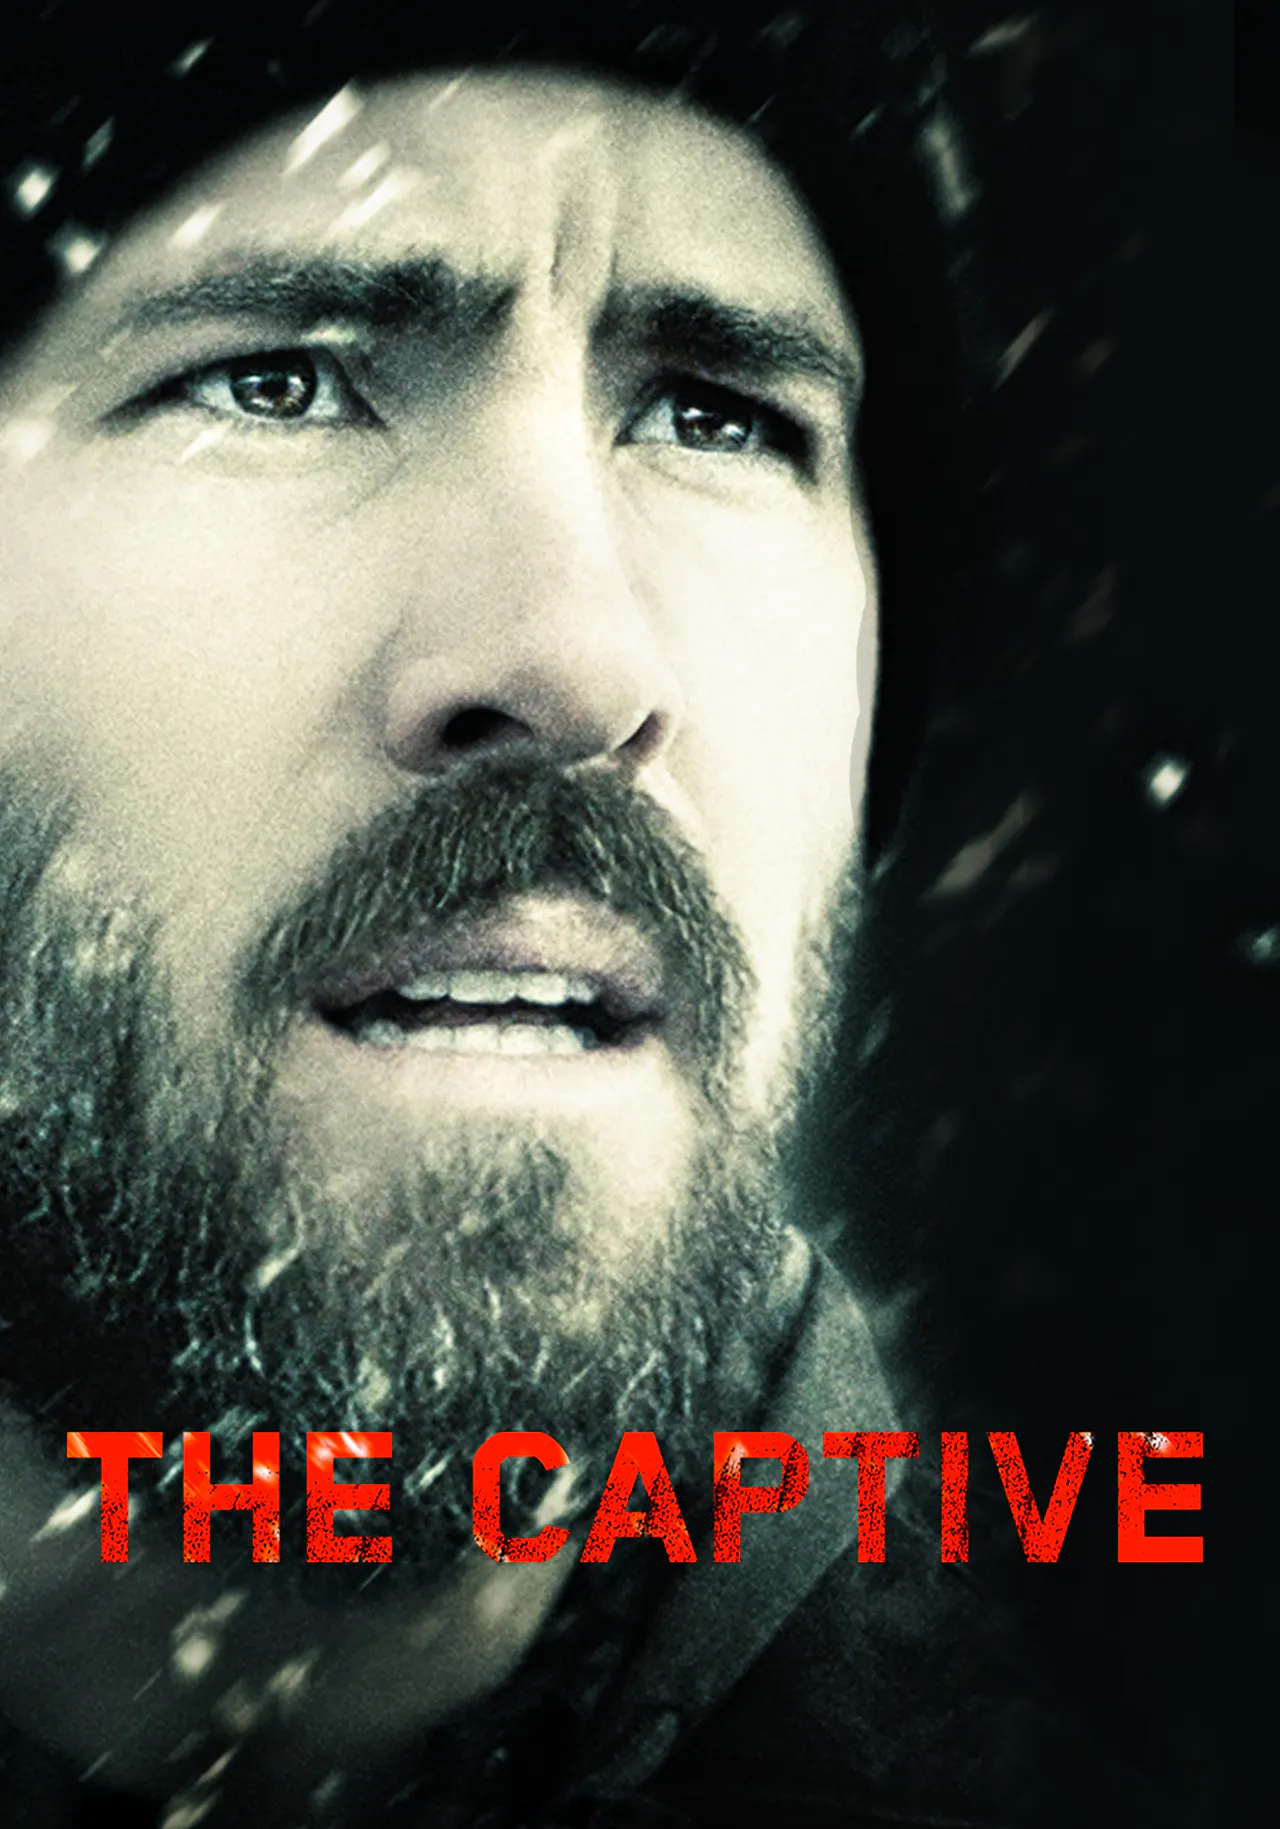 The Captive, Se med SkyShowtime her